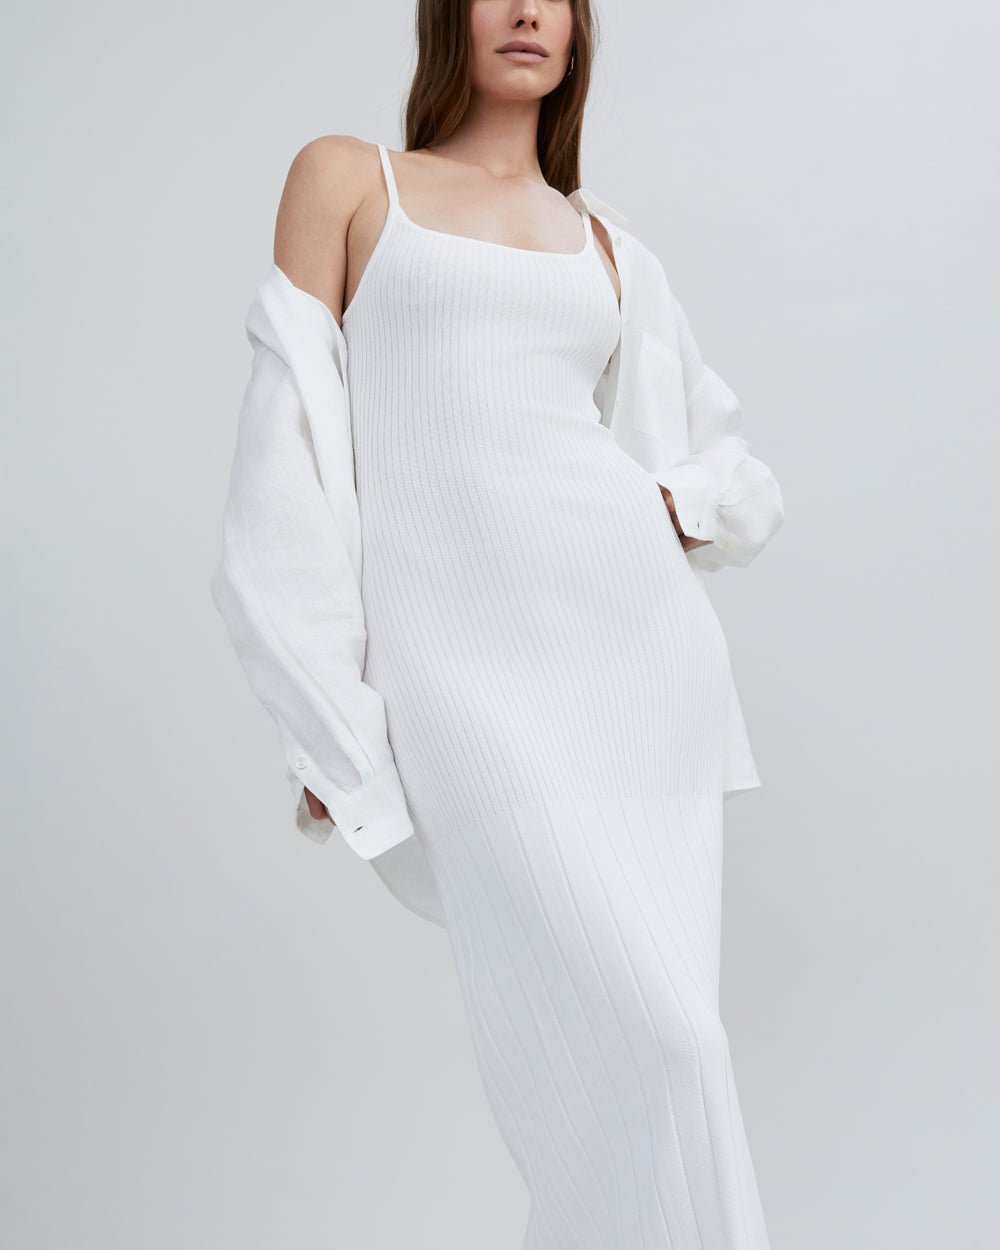 The Noel Dress - Solid & Striped